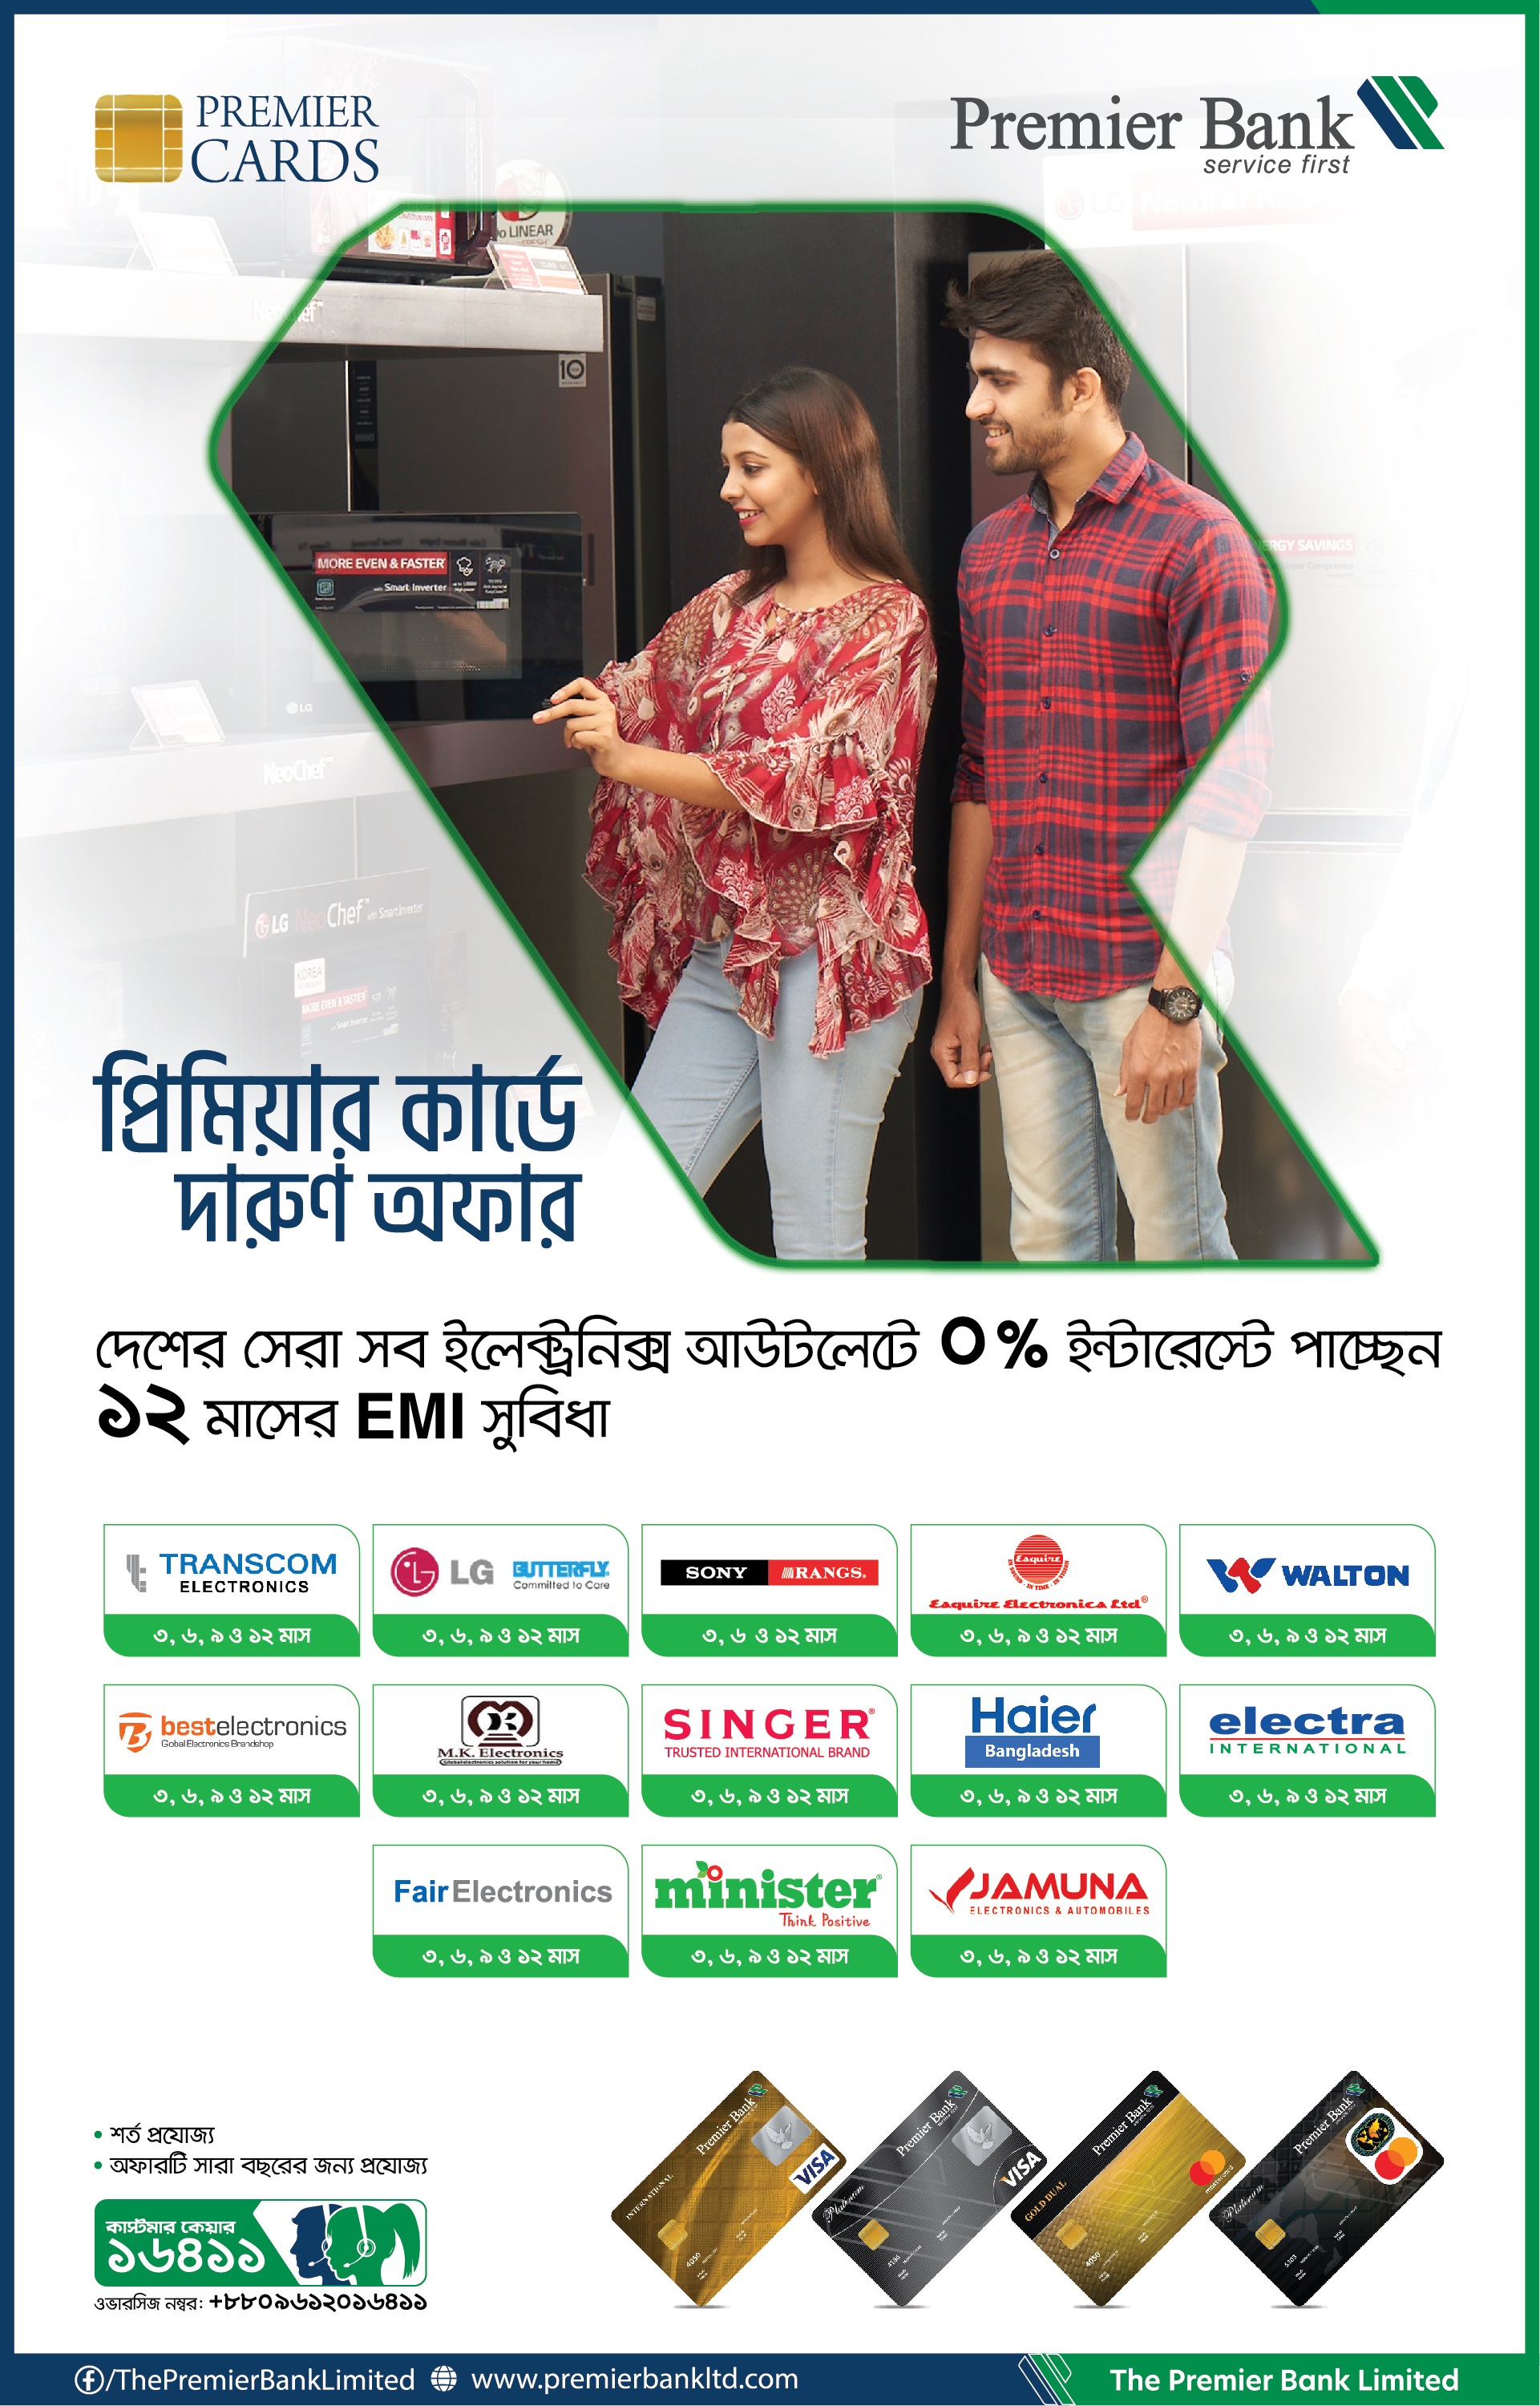 Enjoy 12 months EMI Facility on Electronics outlets by Premier Bank Mastercard